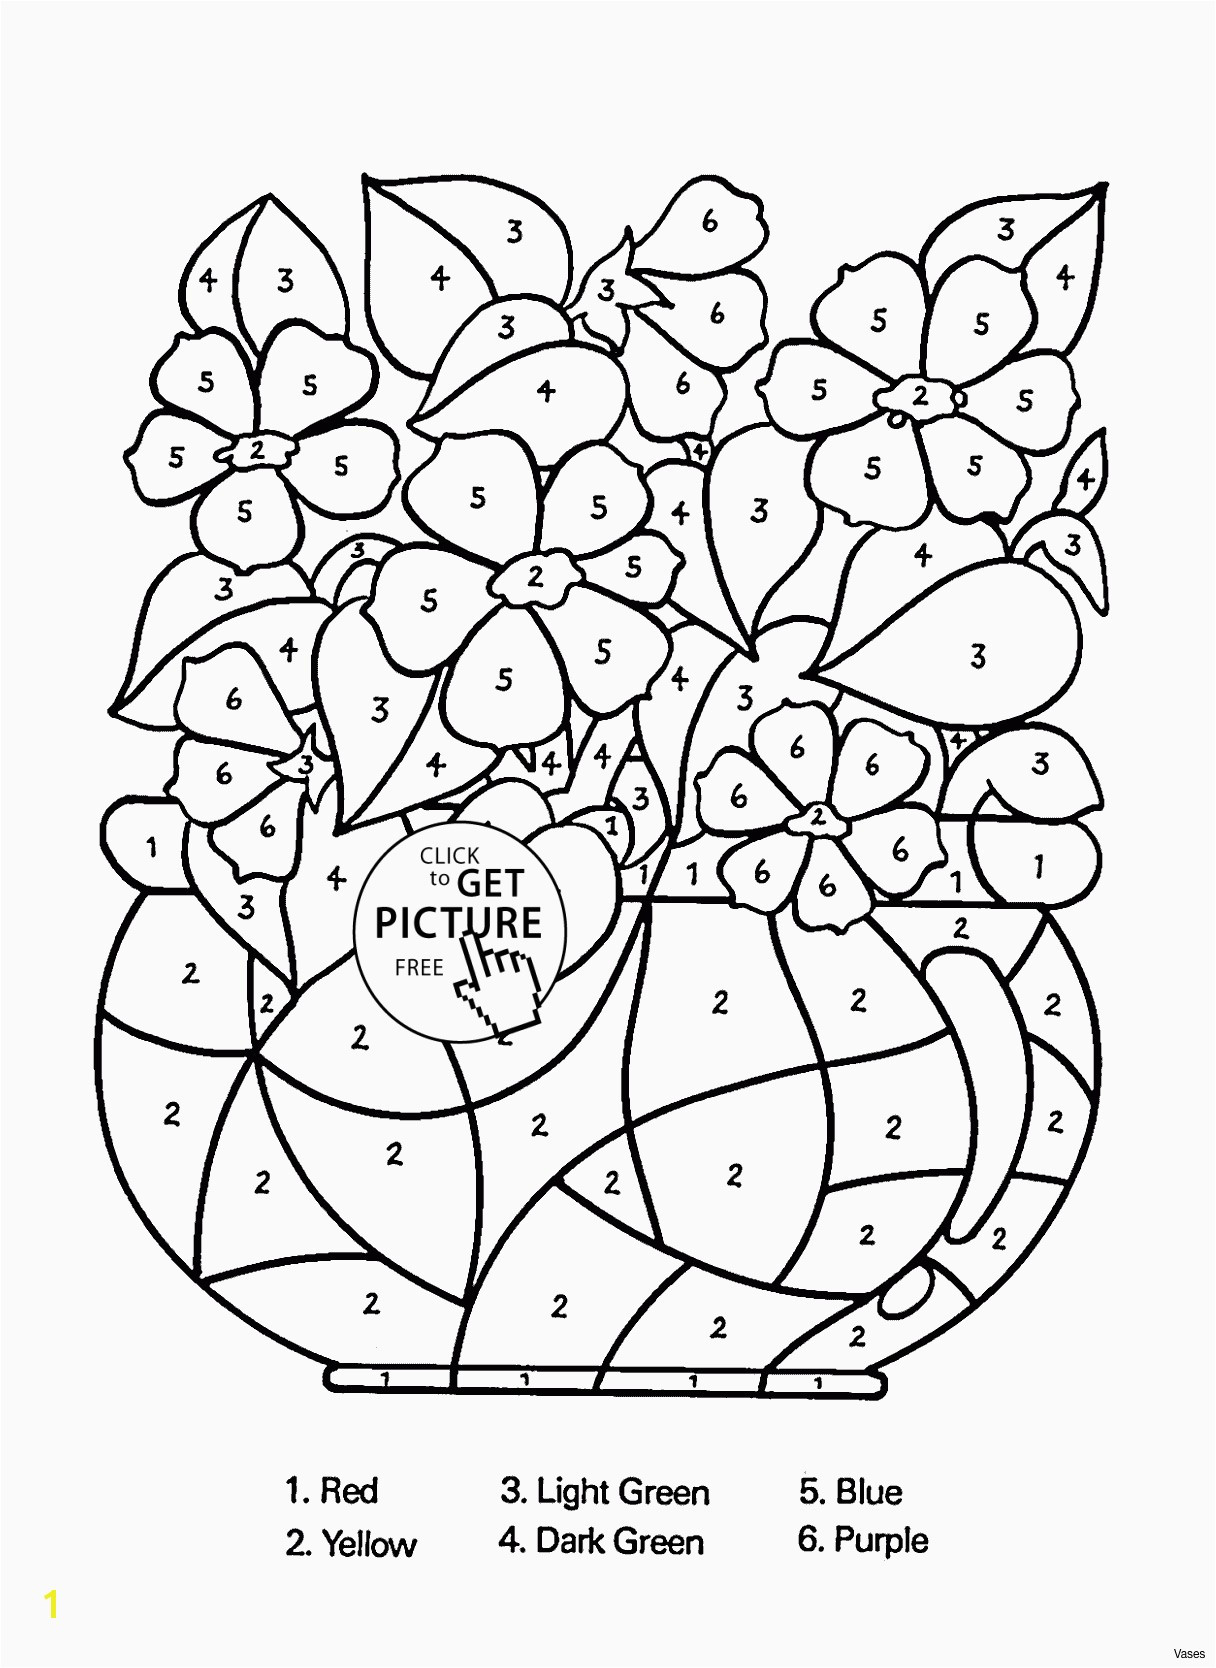 white urn vase of flower images coloring pages zabelyesayan com for flower images coloring pages vases flower vase coloring page pages flowers in a top i 0d